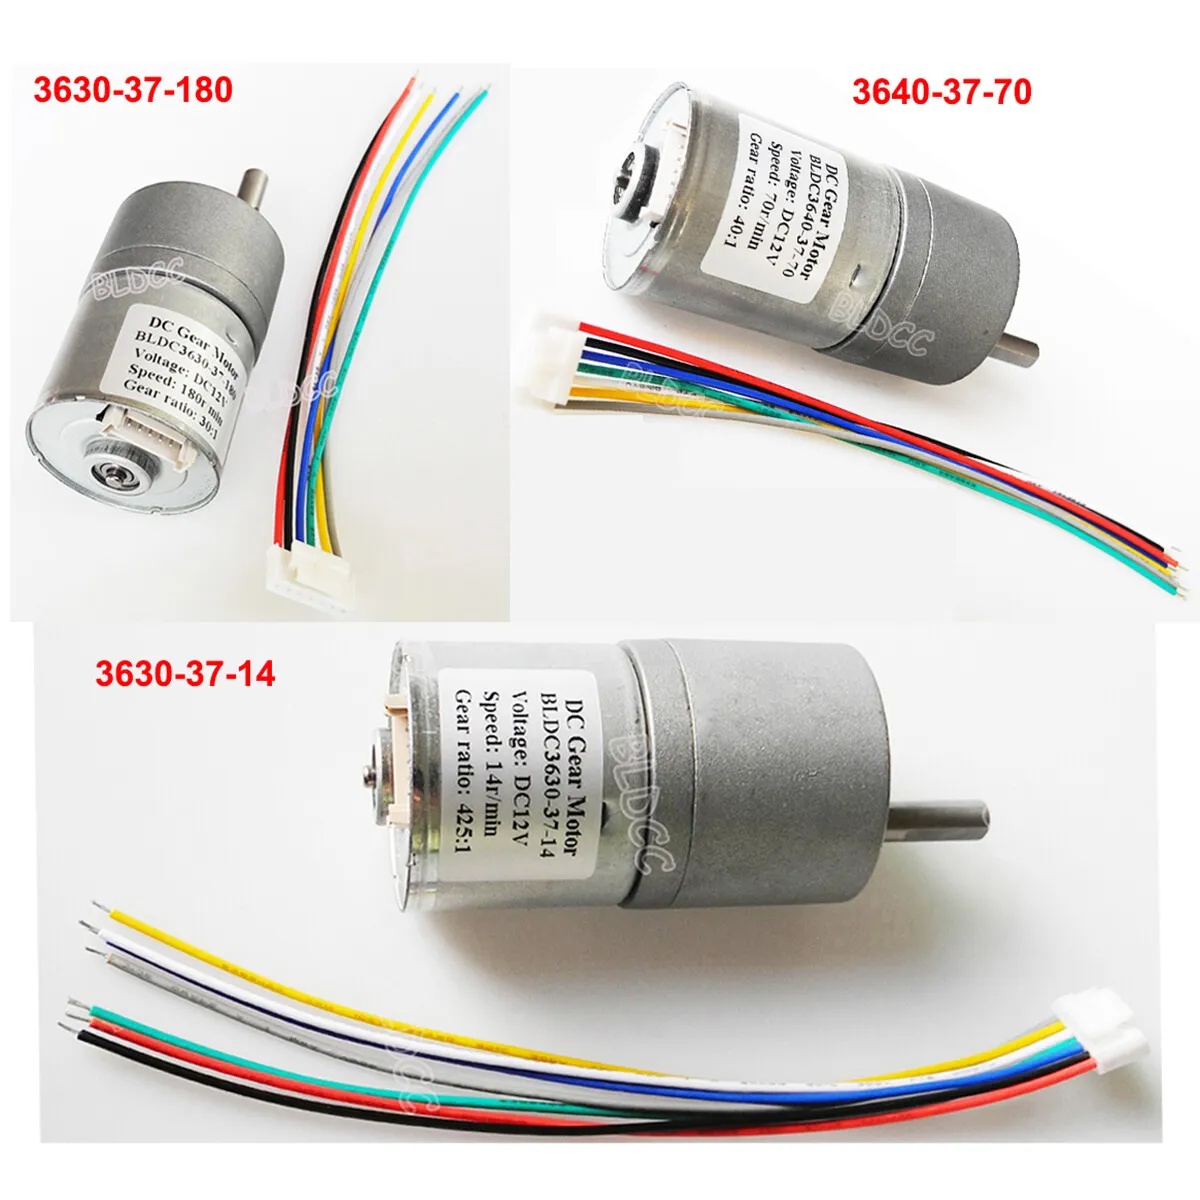 Brushless DC Gear Motor DC 12V BLDC Gear Motor PWM CW/CCW Dual Channel  Pulse